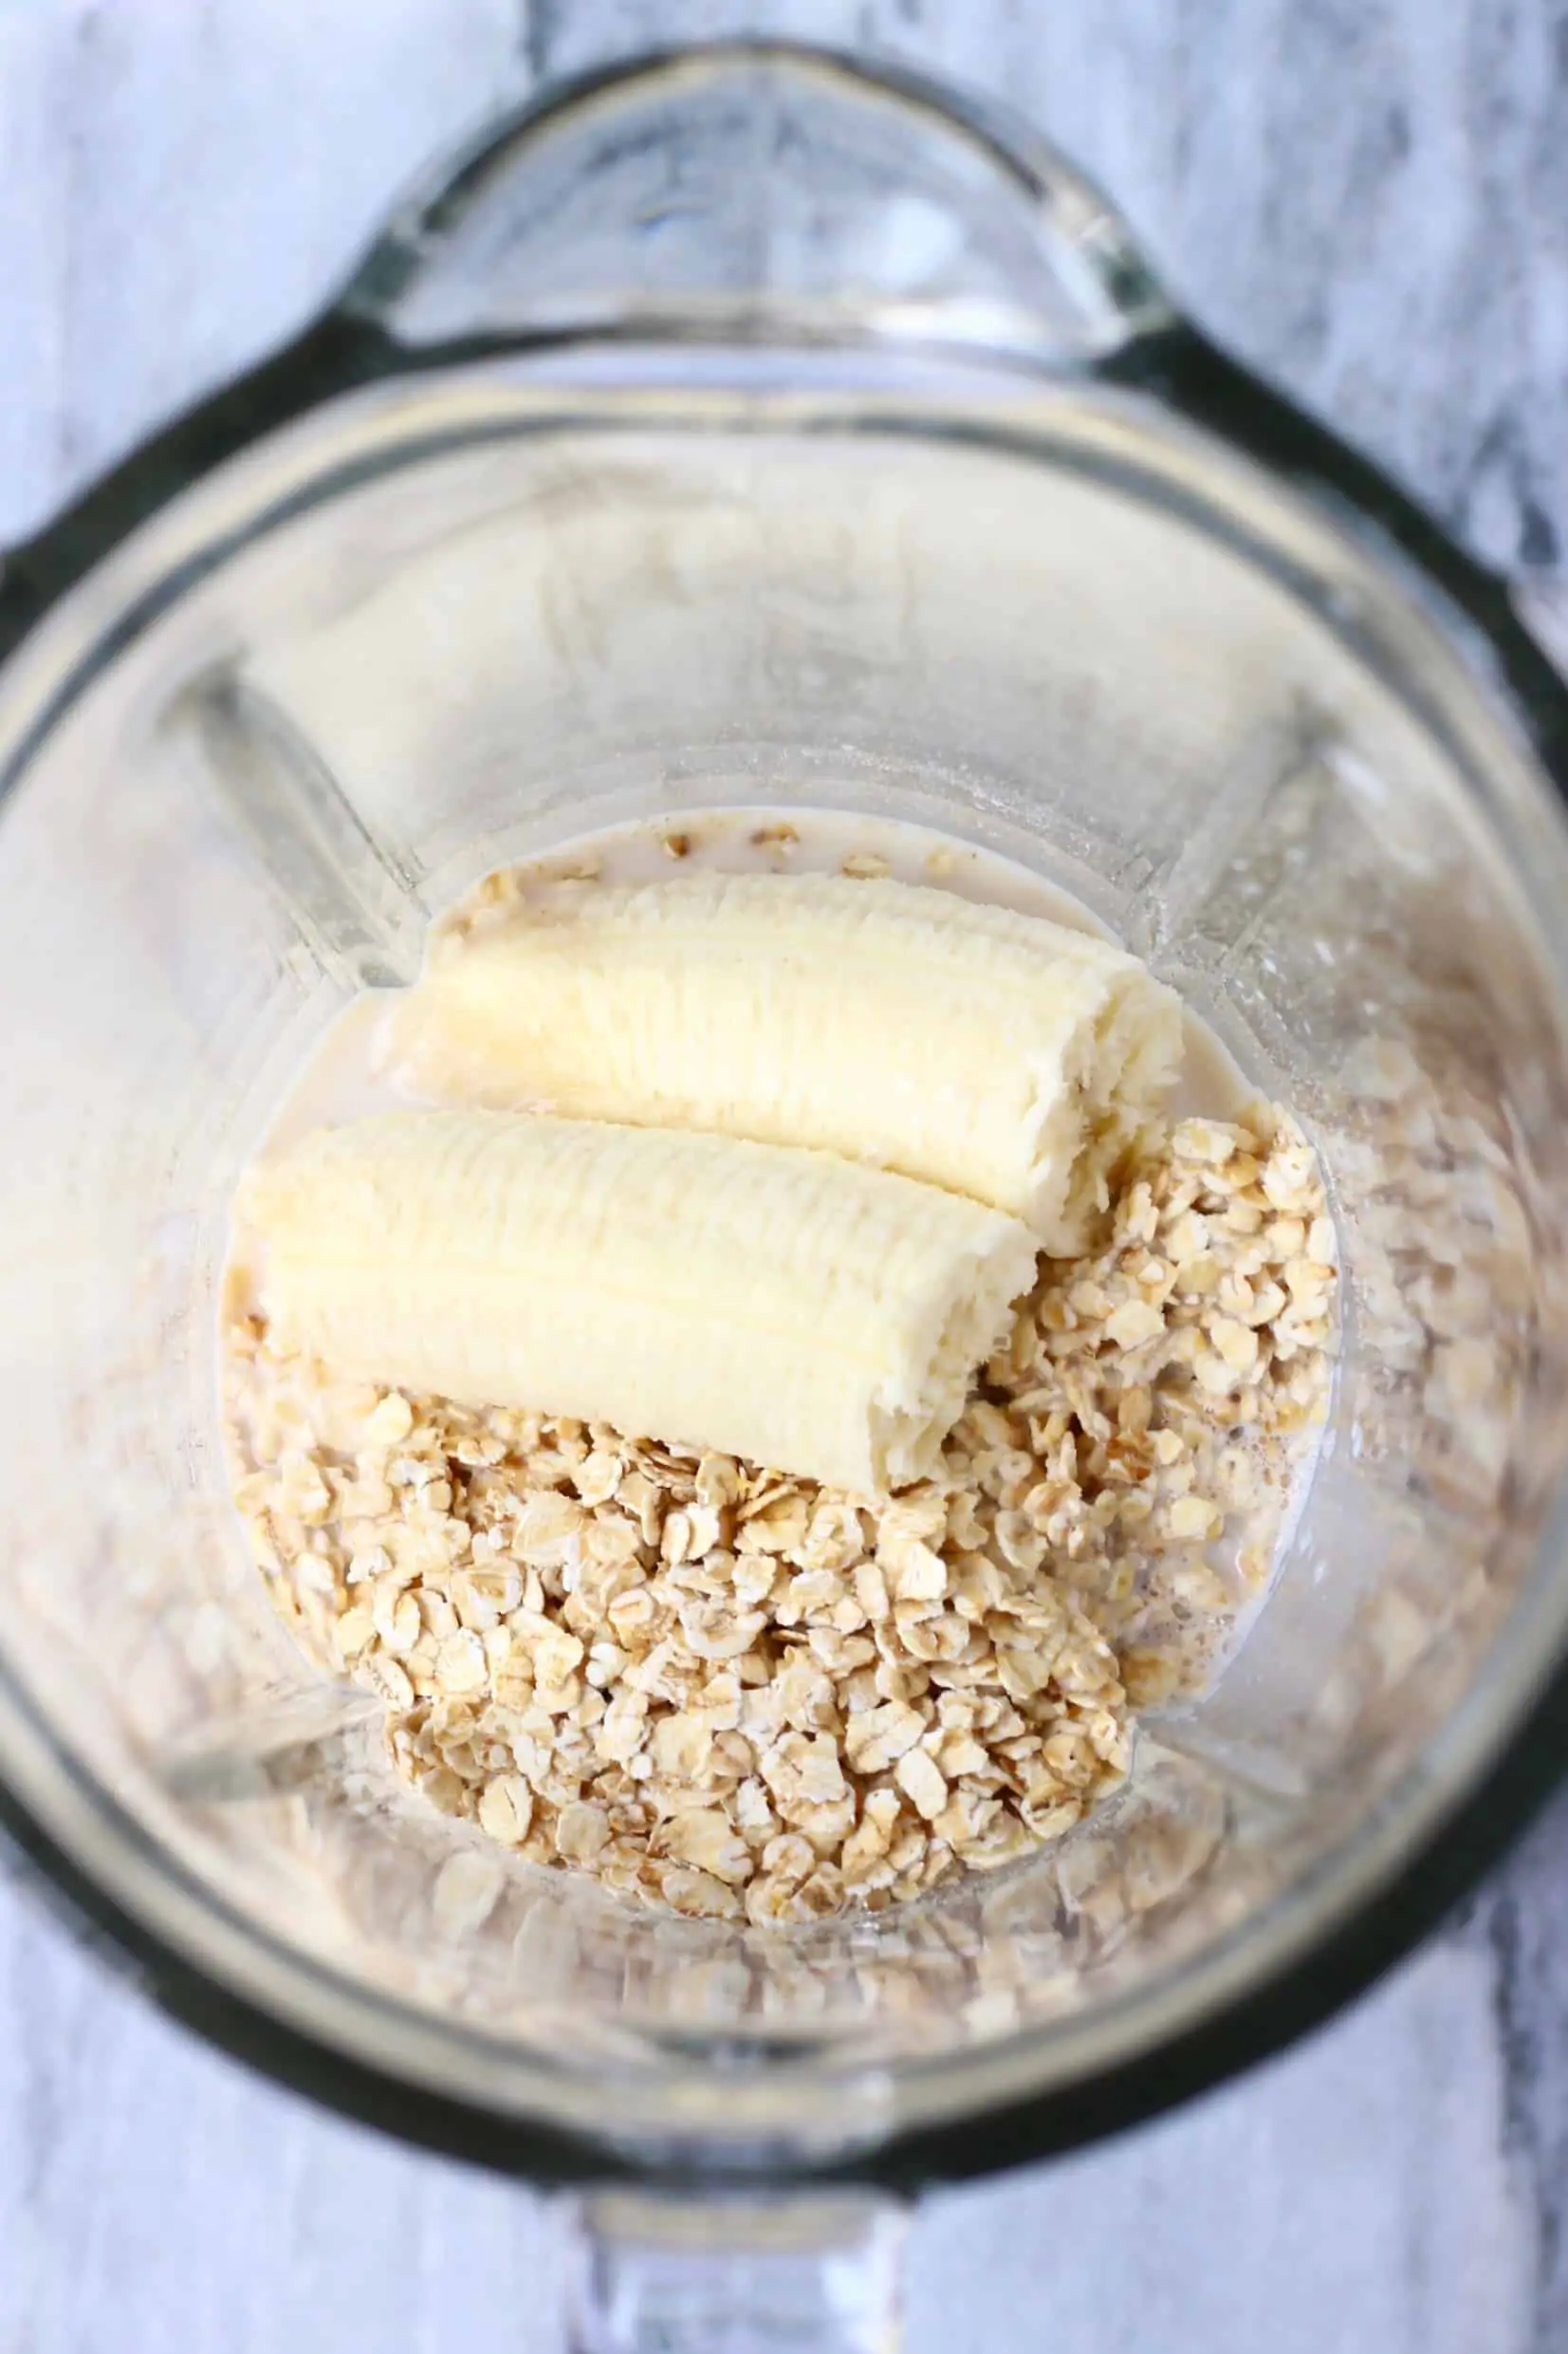 Oats, banana and almond milk in a blender against a marble background